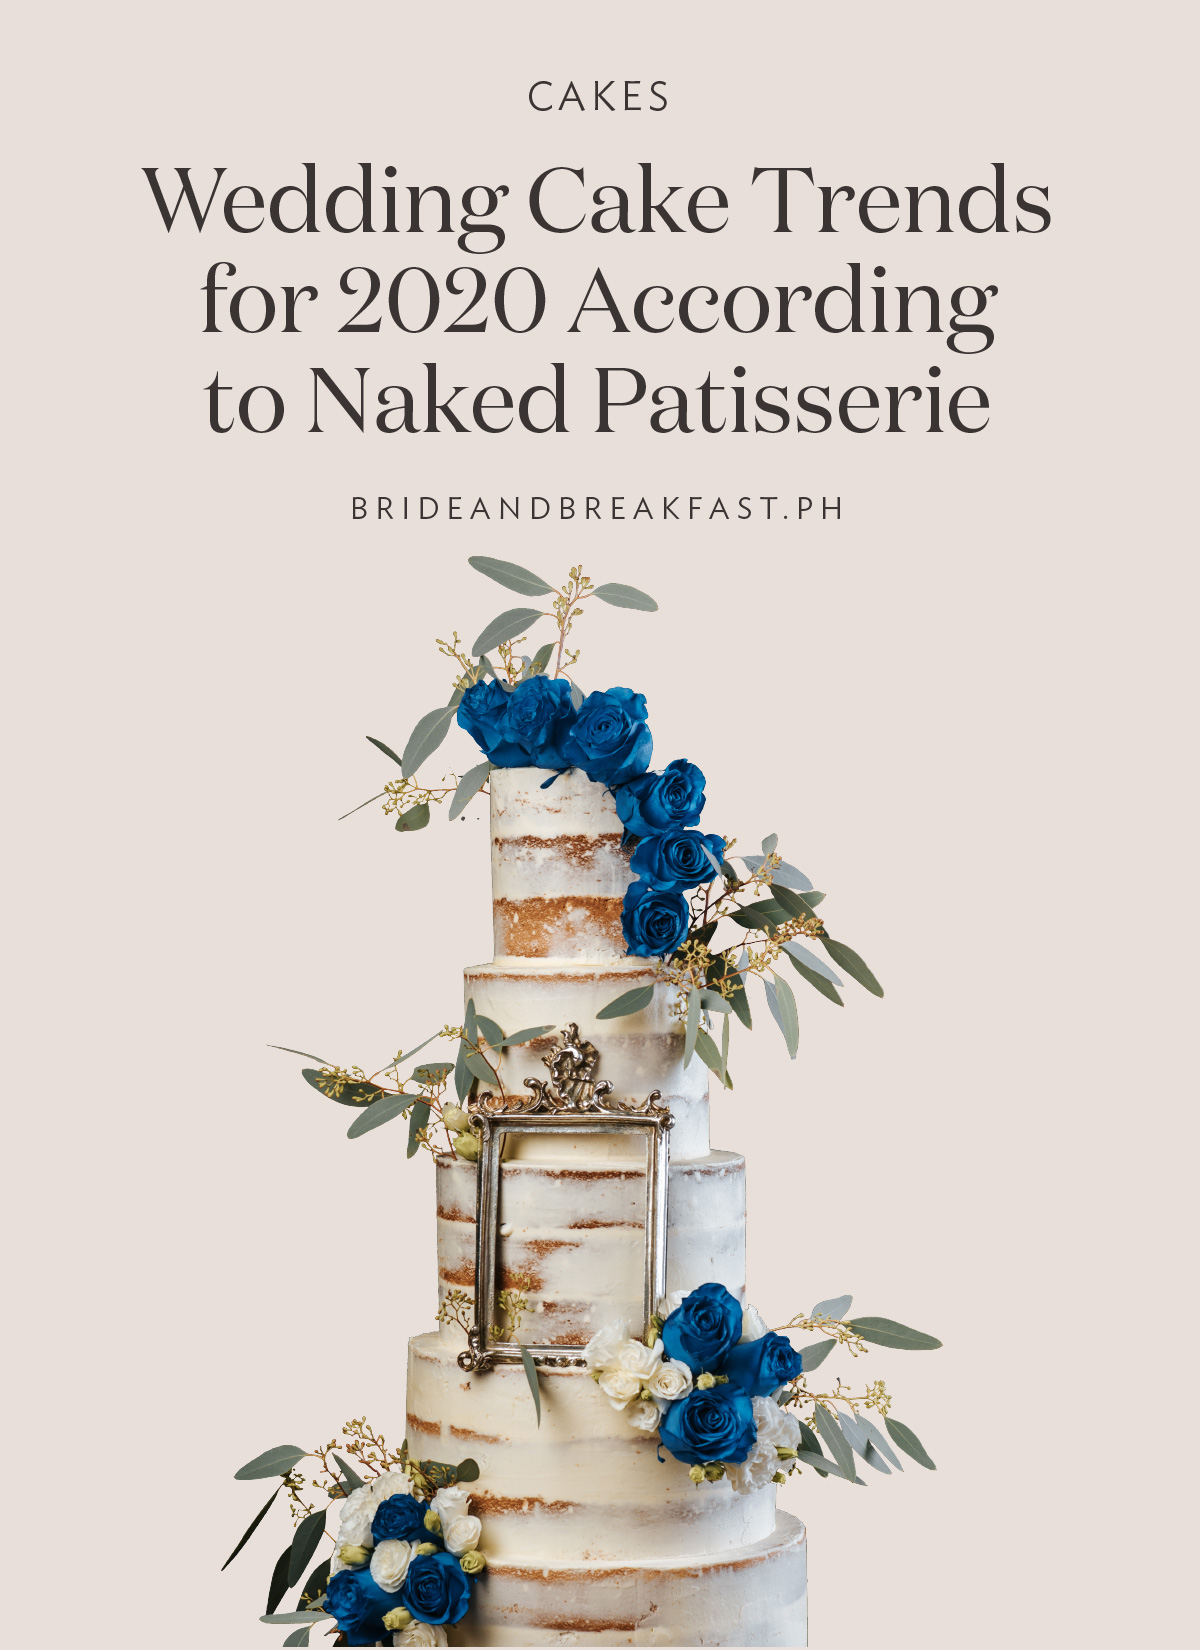 Wedding cake trends for 2020 according to naked patisserie